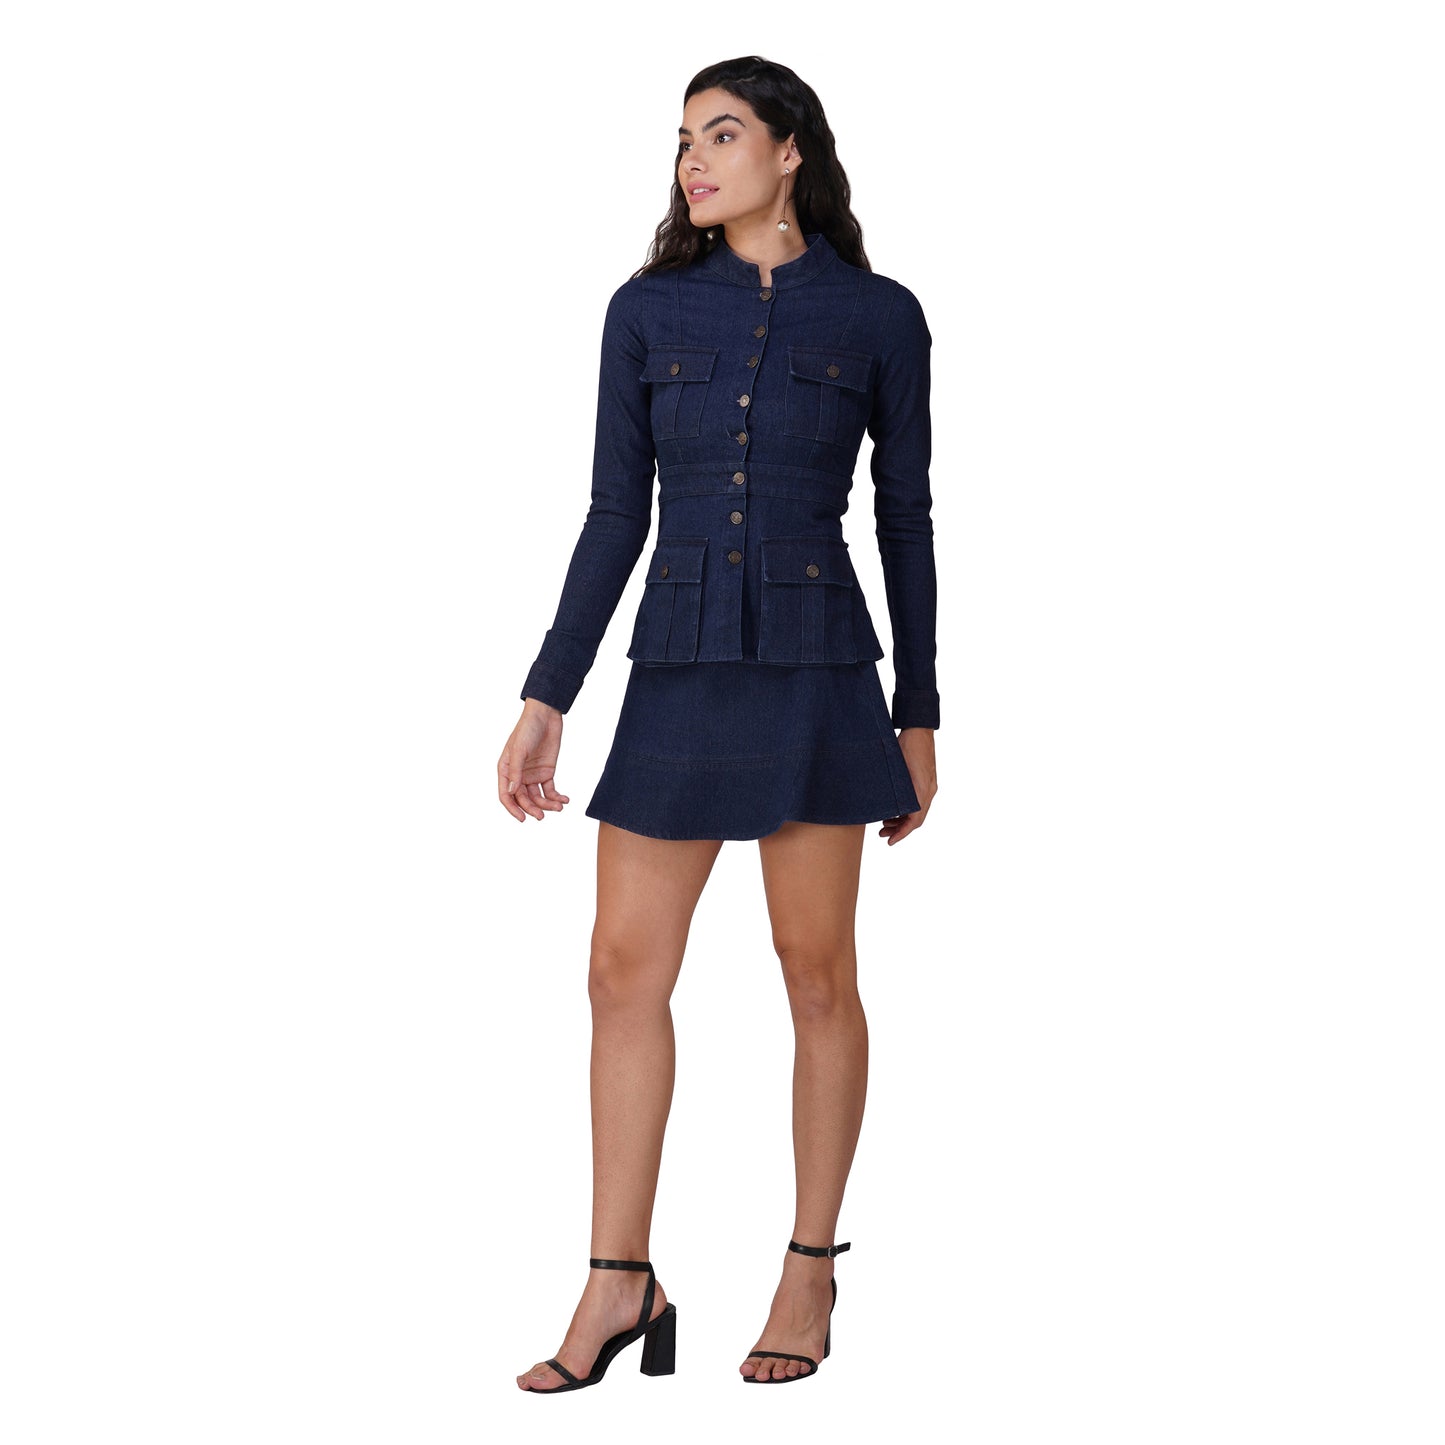 SLAY. Women's Denim Full Sleeves Button Up Top & Skirt Co-ord Set (Stretchable Fabric)